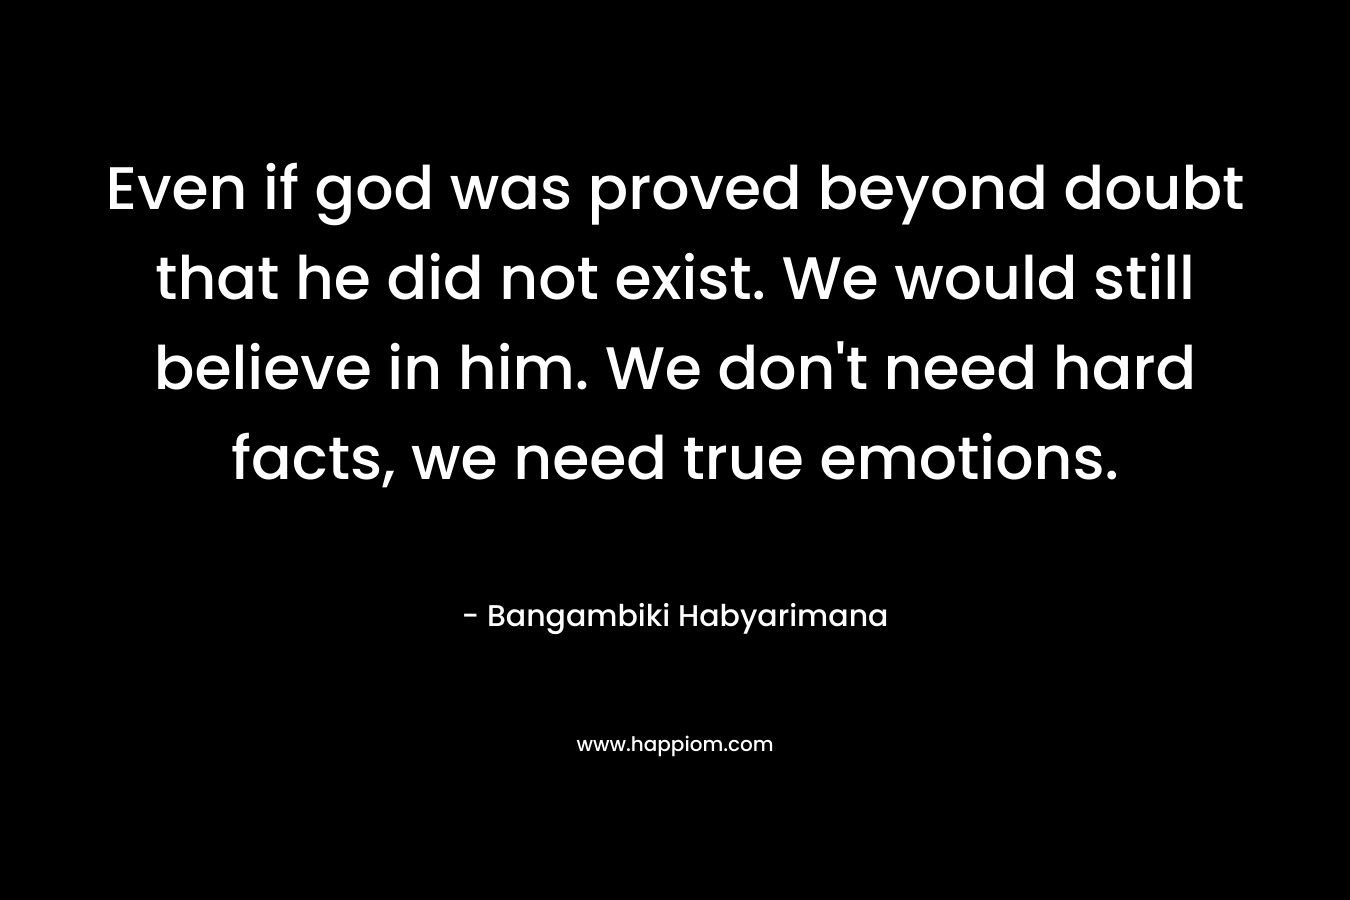 Even if god was proved beyond doubt that he did not exist. We would still believe in him. We don’t need hard facts, we need true emotions. – Bangambiki Habyarimana